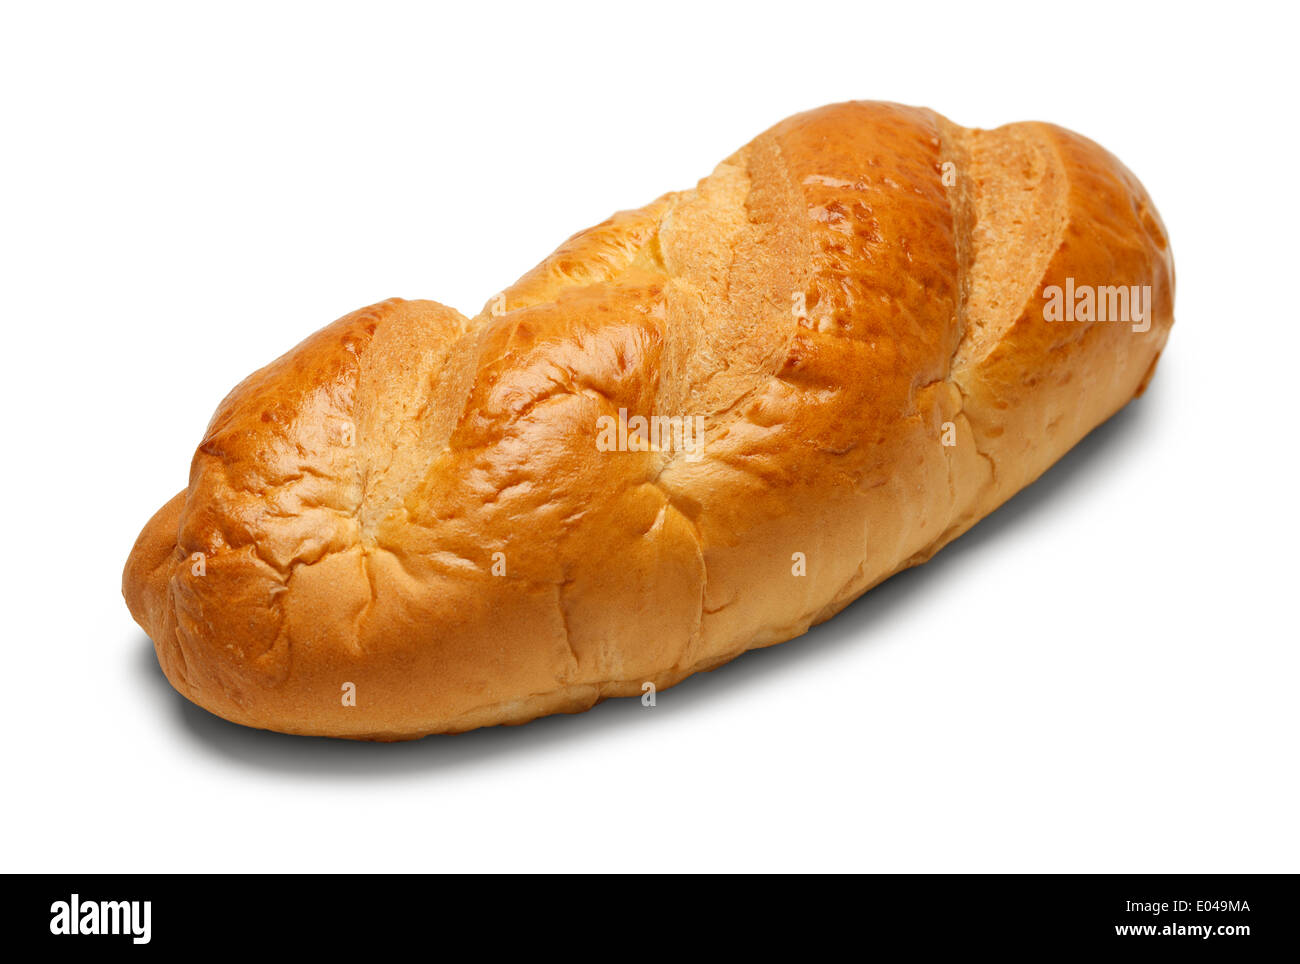 Loaf of Fancy Bread Isolated on White Background. Stock Photo